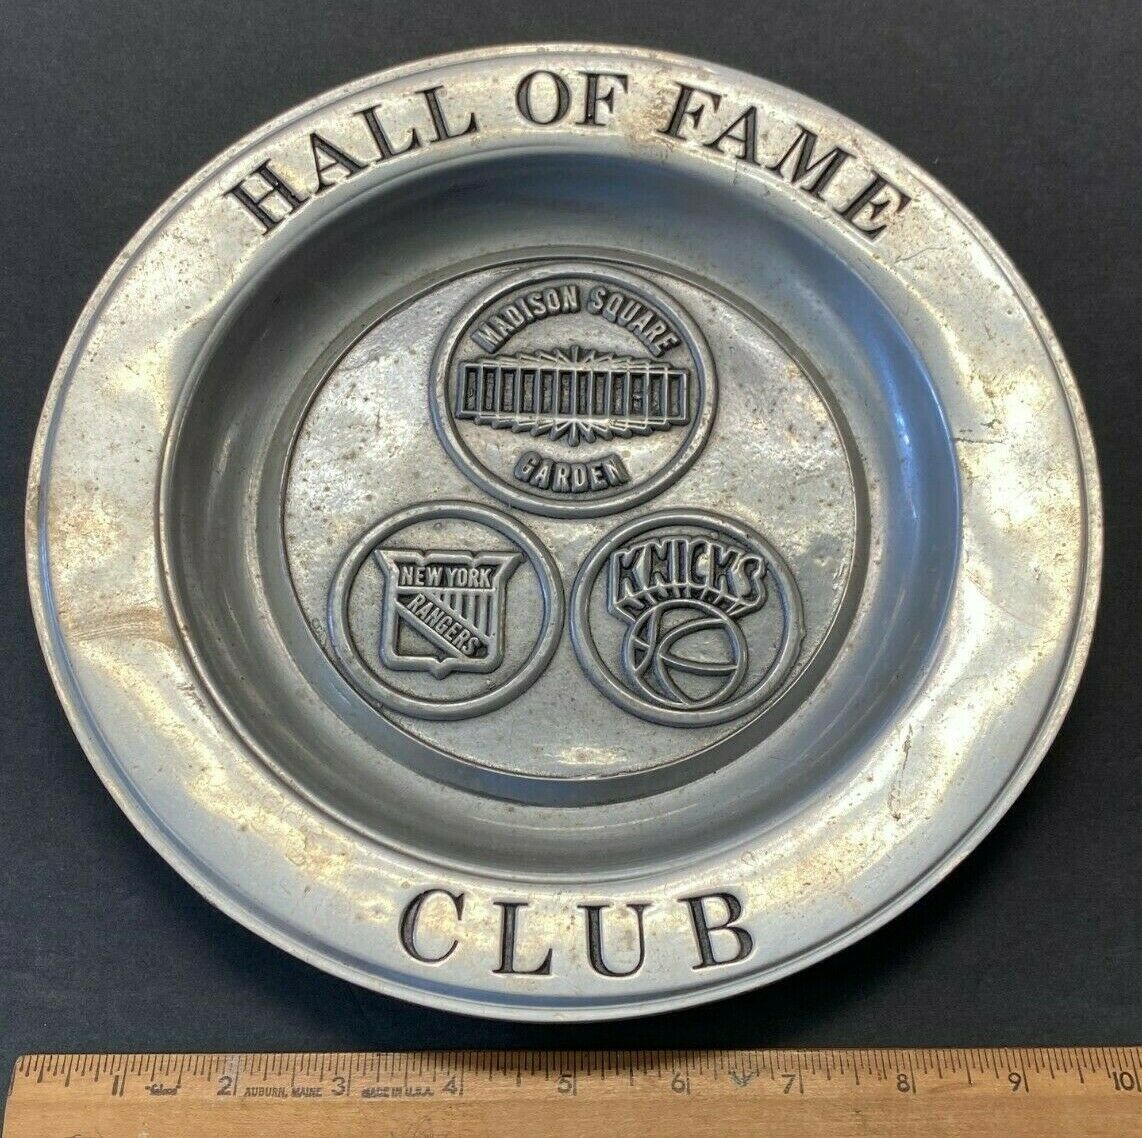 Hall Of Fame Club Madison Square Garden Ny Knicks/rangers 10.5" Plate Ms 9821